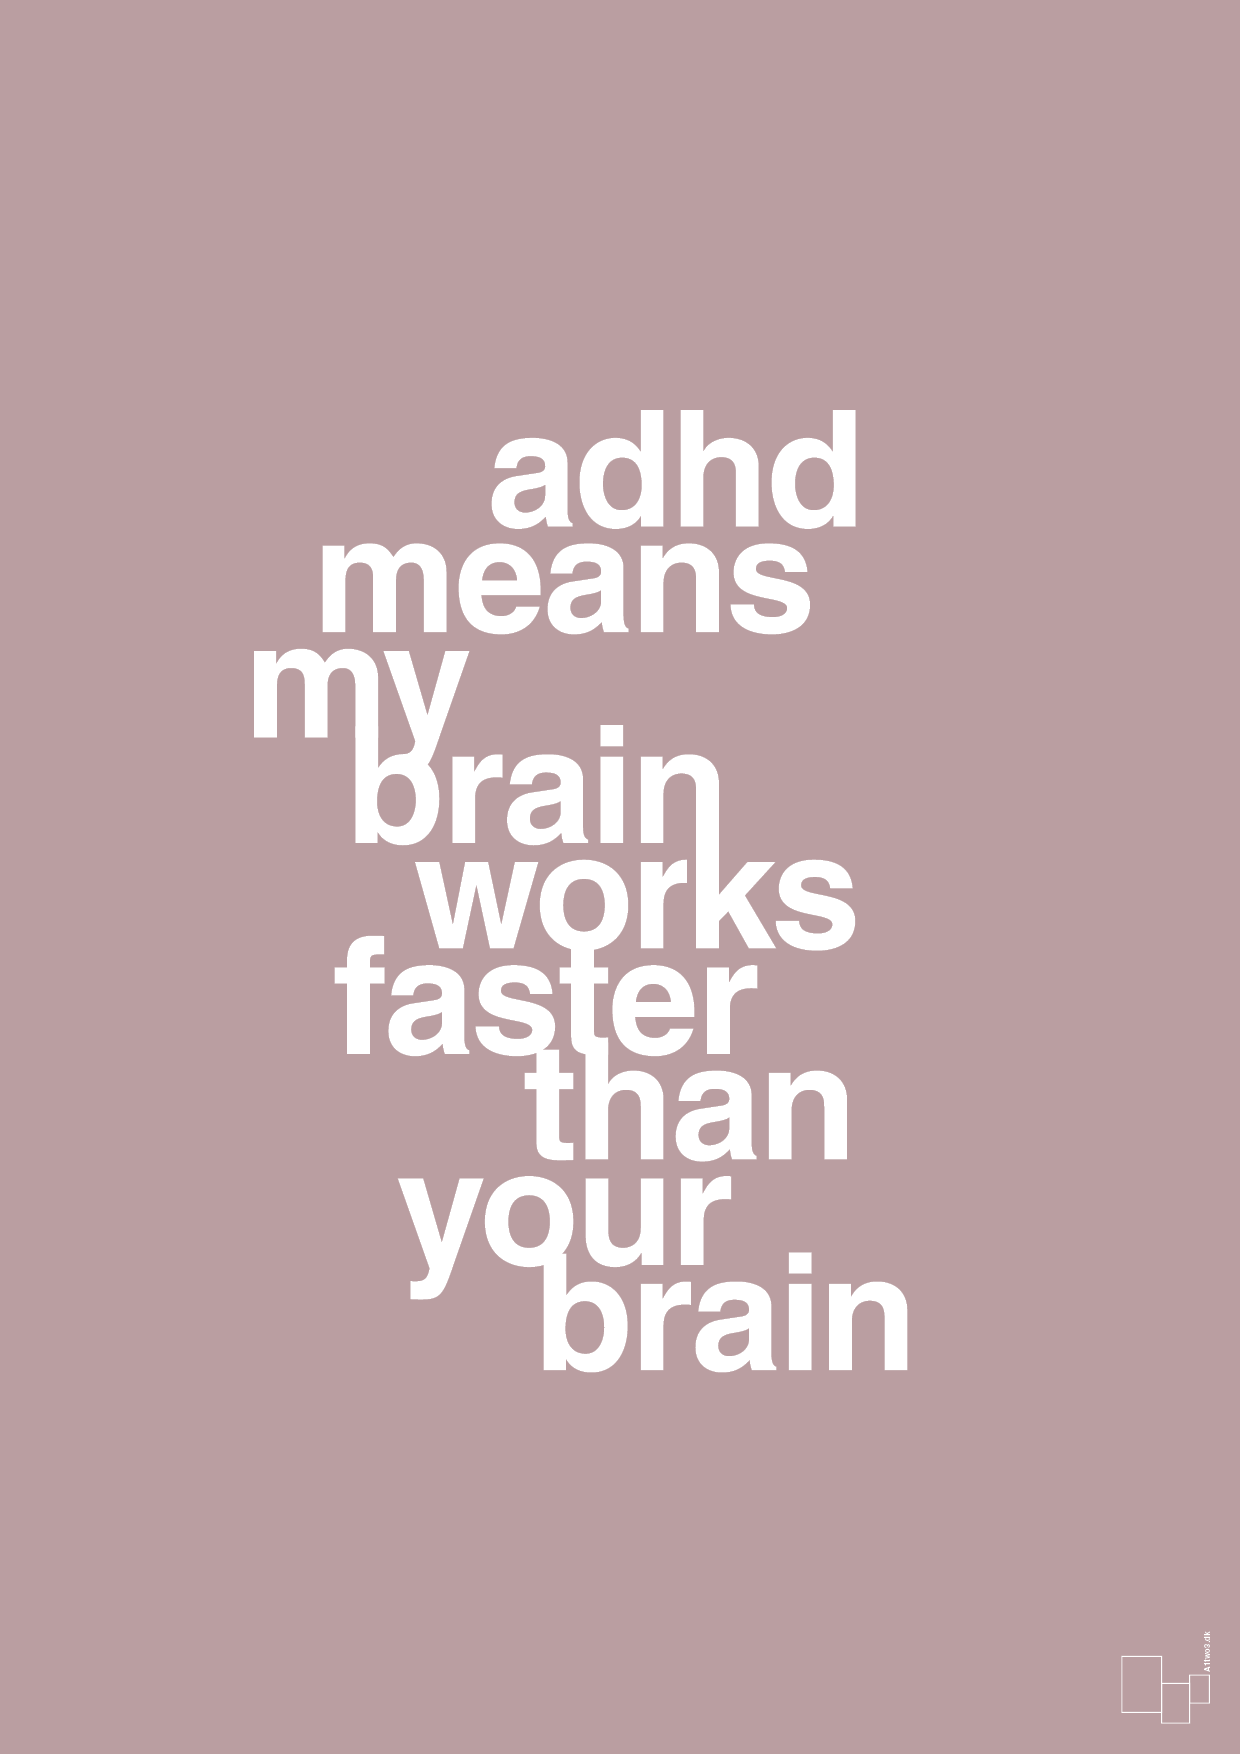 adhd means my brain works faster than your brain - Plakat med Samfund i Light Rose